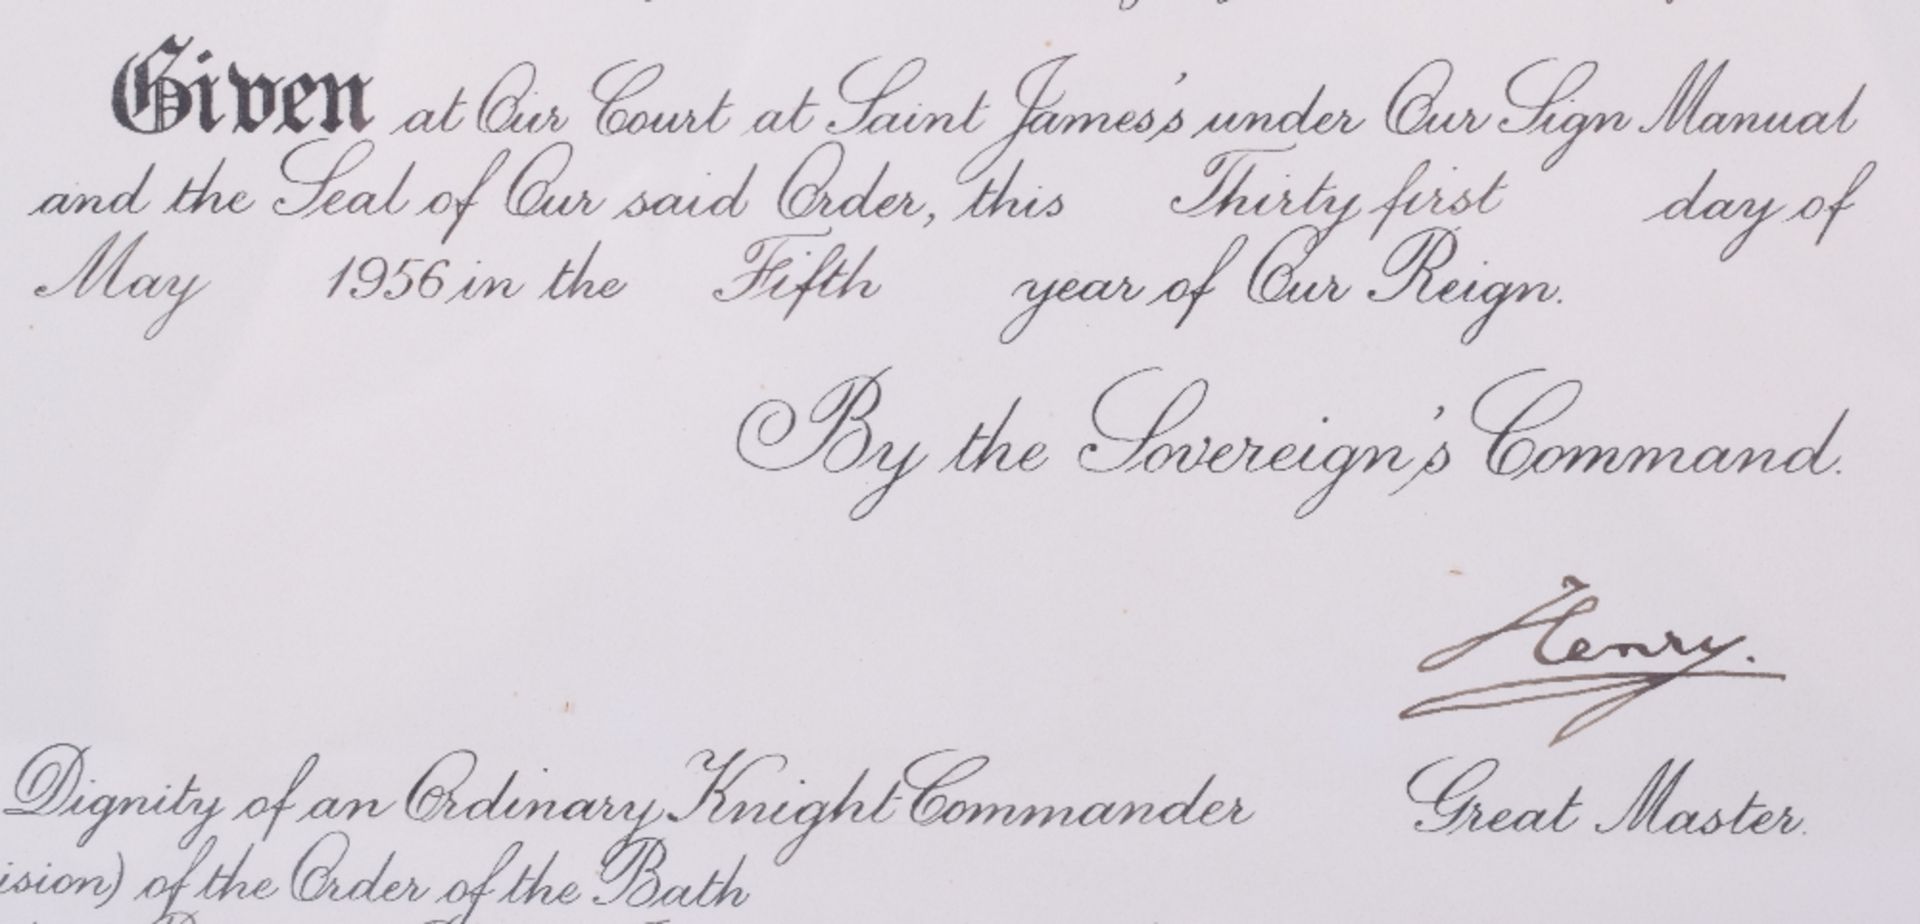 Grant Document of Knight Commander of the Order of Bath to Air Marshall Richard Bowen Jordan DFC, w - Image 3 of 4